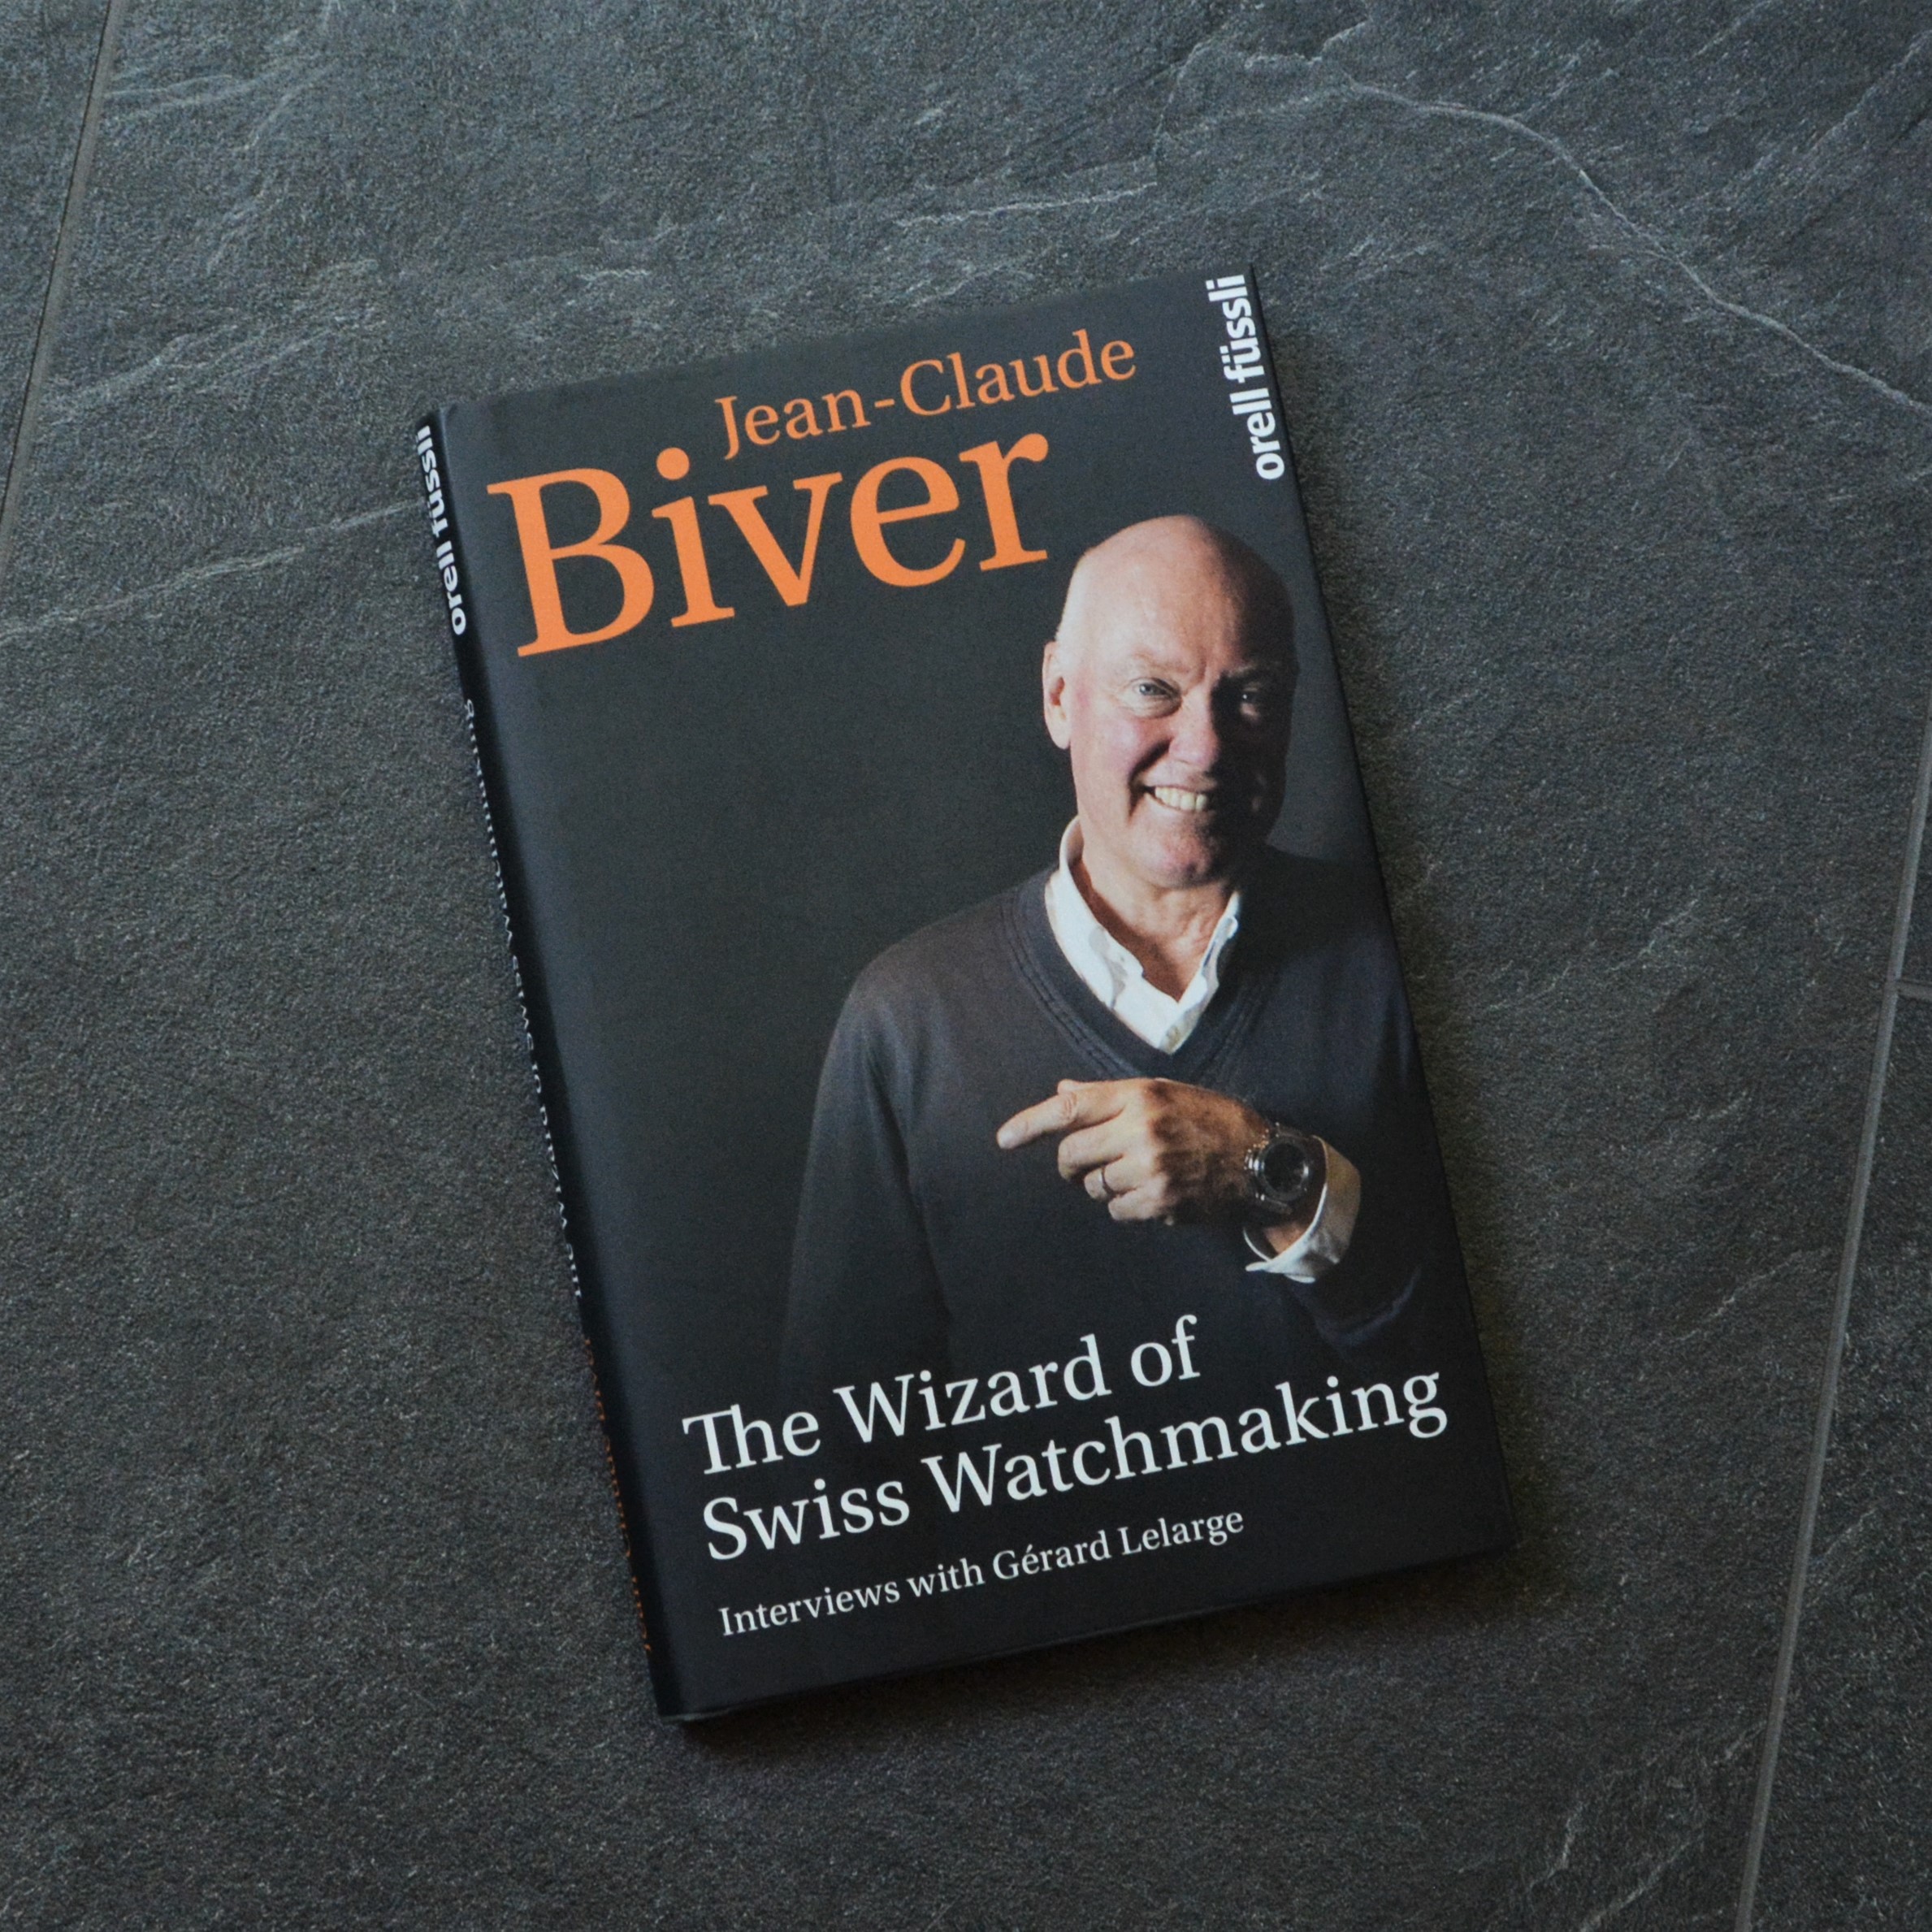 Recommended Reading: 'The Wizard of Swiss Watchmaking' - Interviews with  Jean-Claude Biver - Watch Affinity